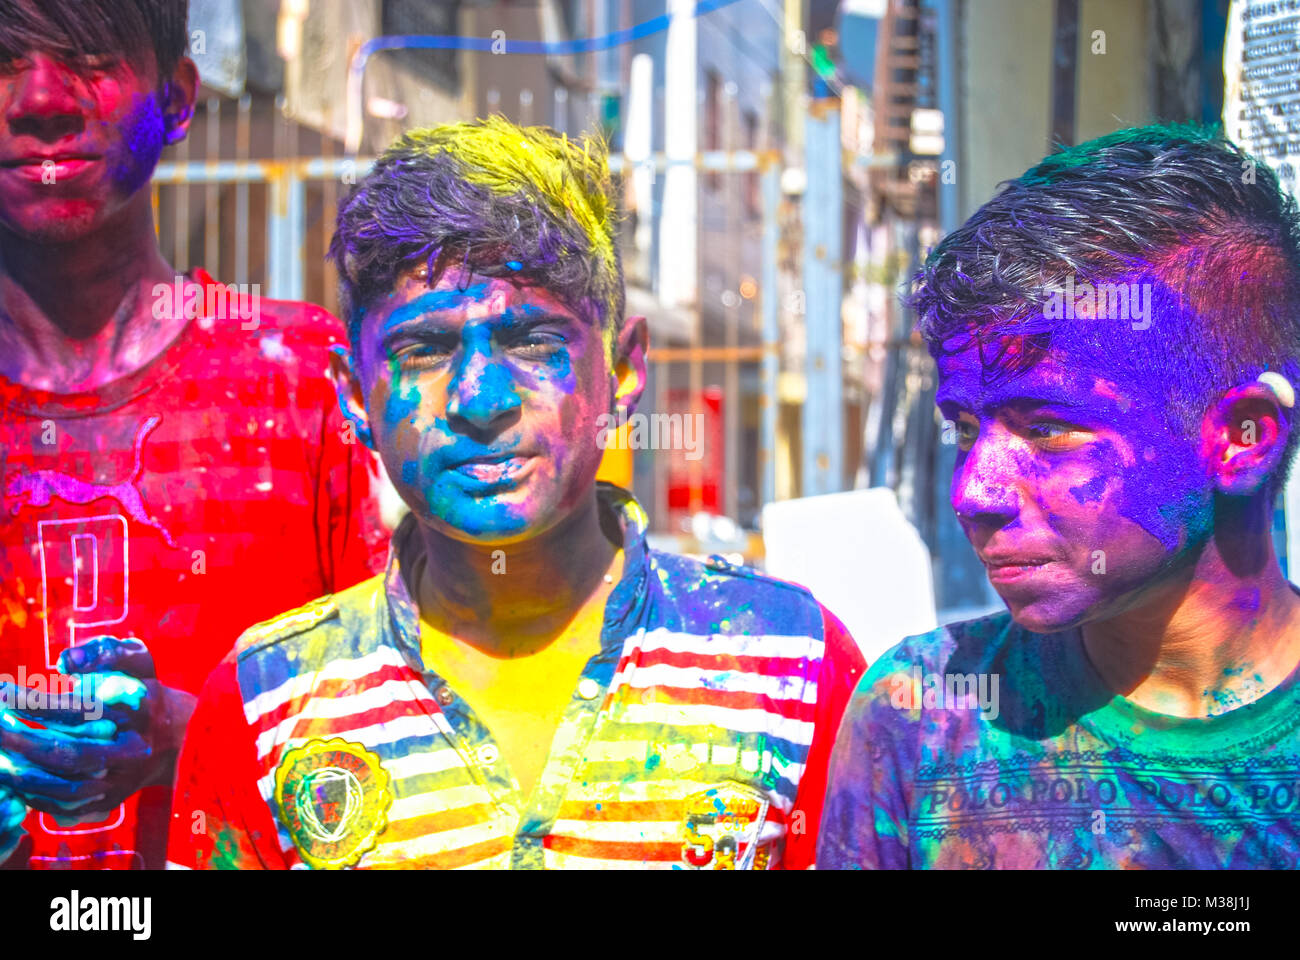 A group of teenage boys covered in powder paint during the celebration of the Hindu spring festival Holi in New Delhi, India. Stock Photo